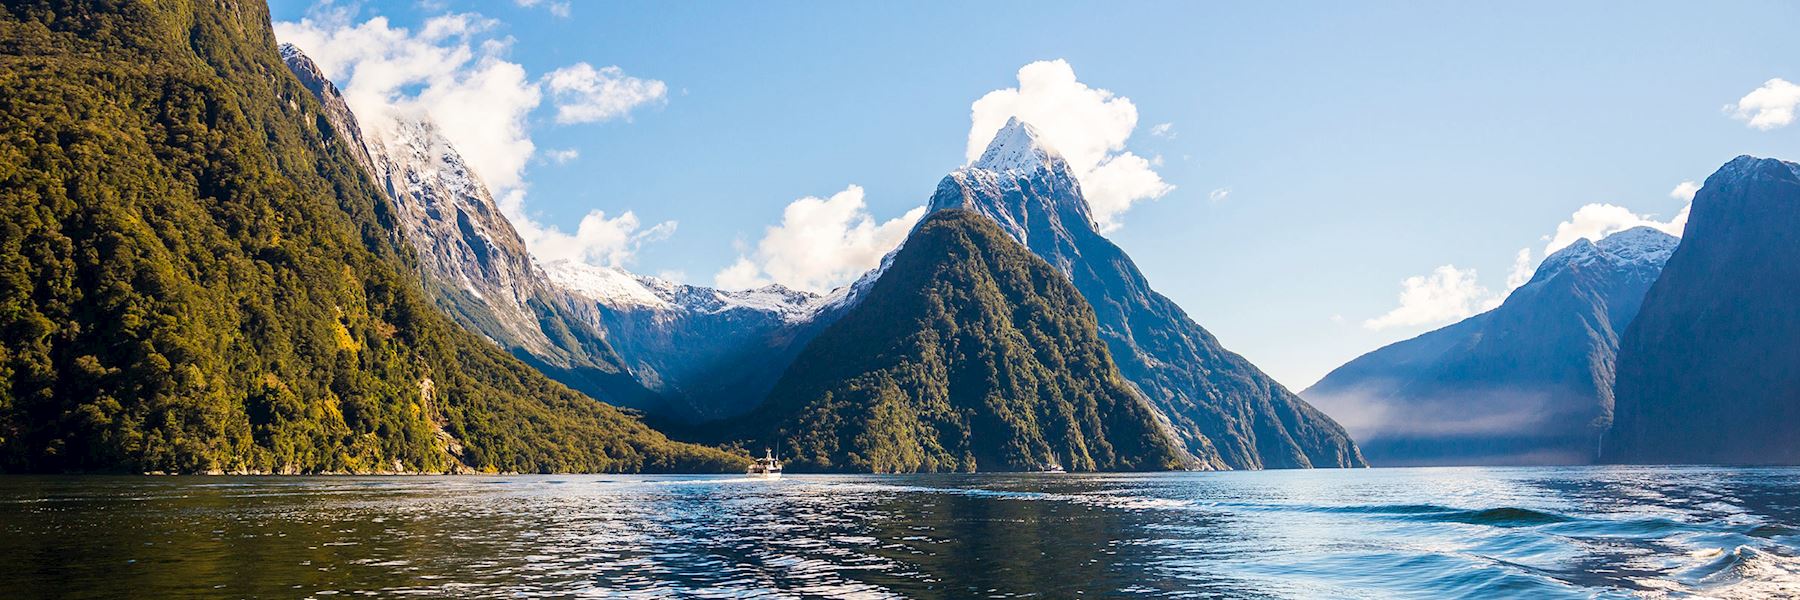 New Zealand Vacations 2019 And 2020 Tailor Made New Zealand Tours